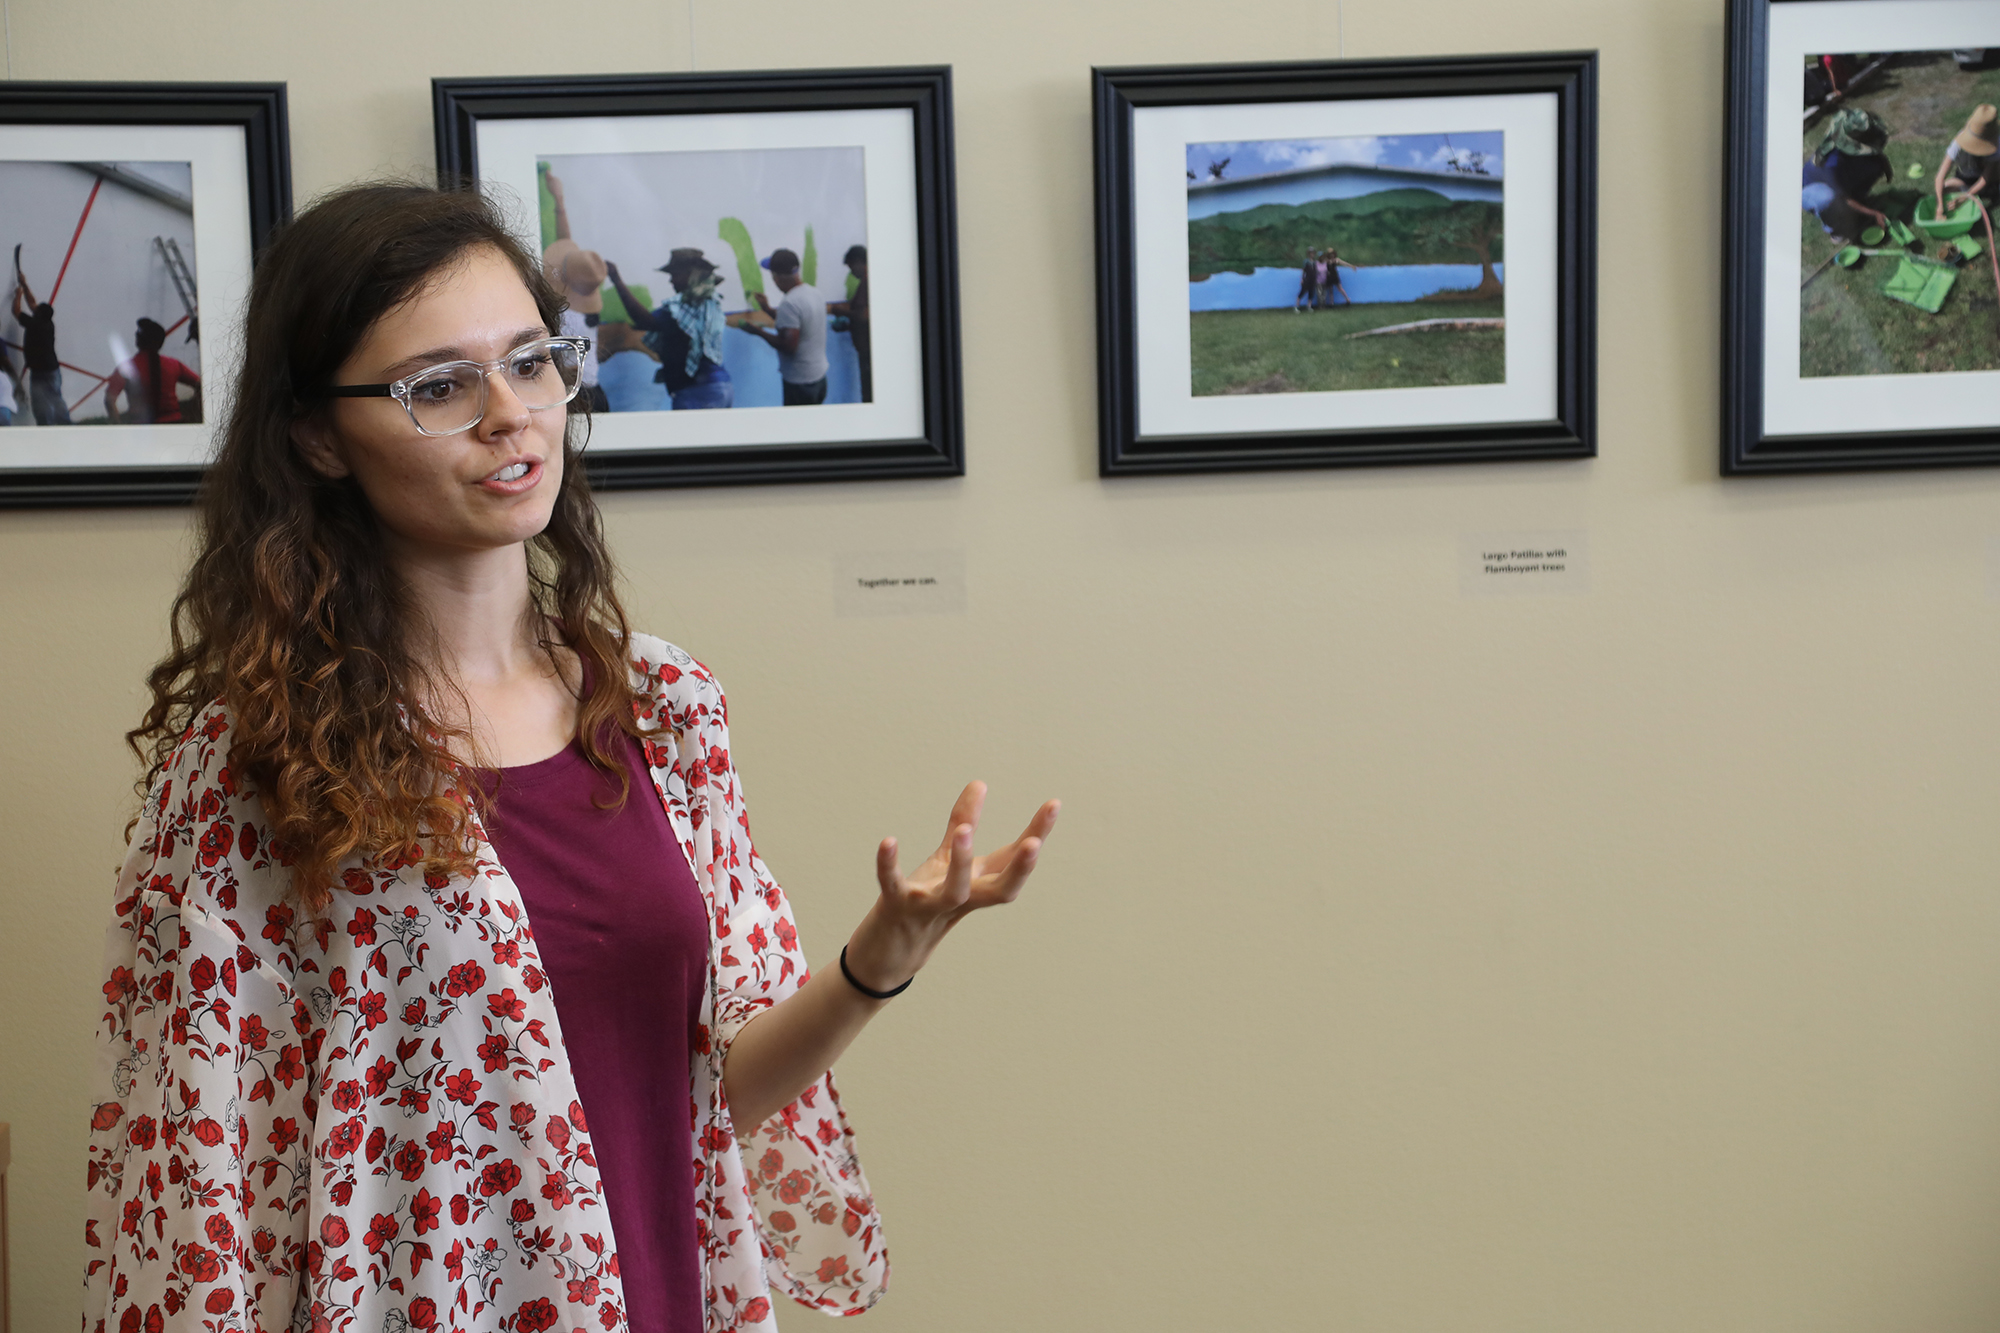 Woman speaking to others at an exhibit with pictures behind her